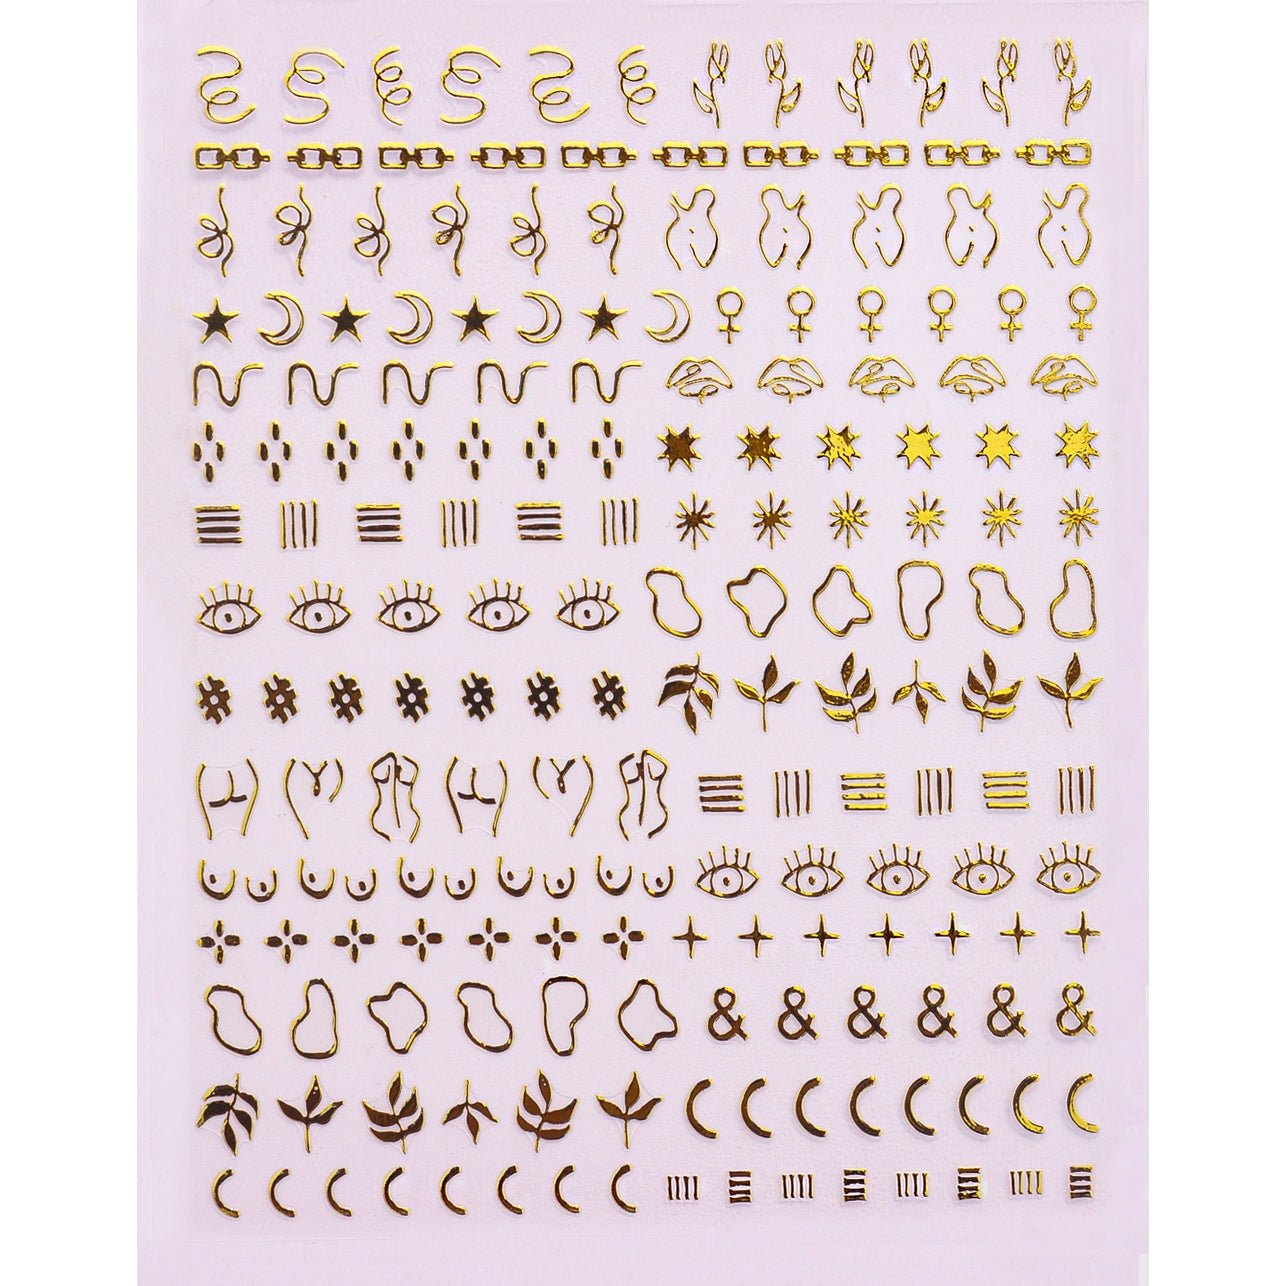 Golden Hour Nail Art Sticker Set | Vegan & Cruelty-Free | Use on Polish, Gel, or Natural Nails